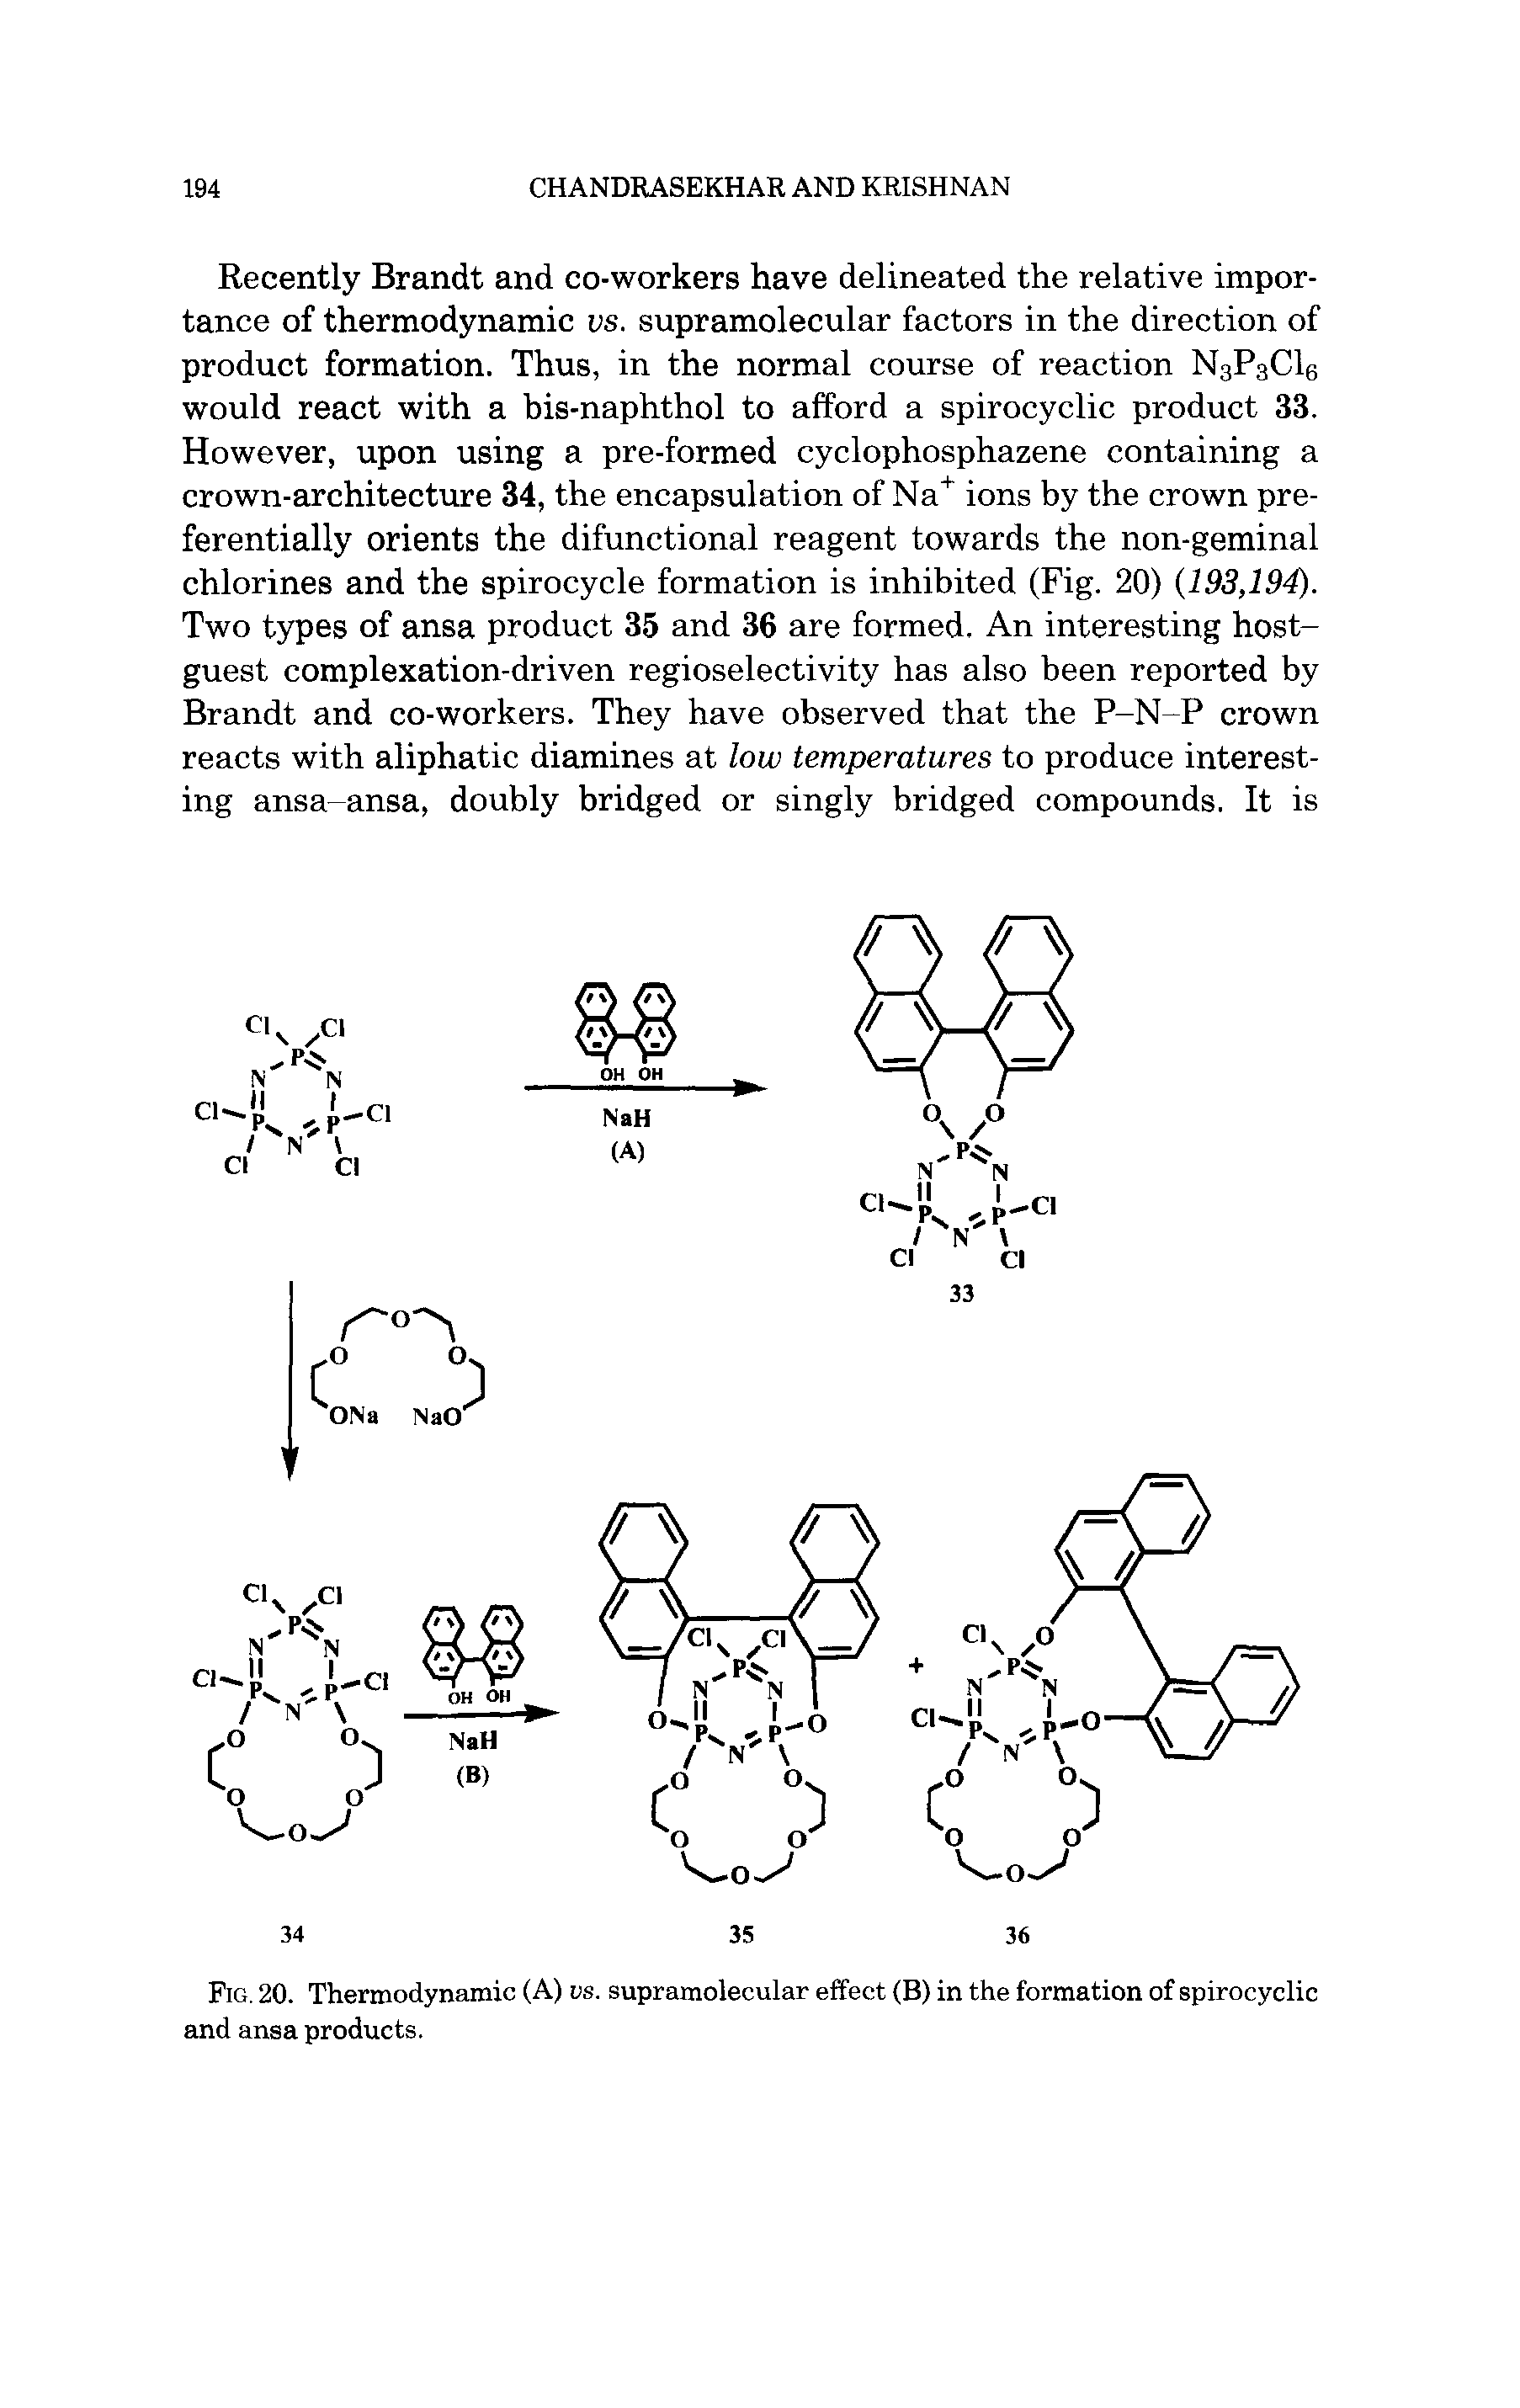 Fig. 20. Thermodynamic (A) vs. supramolecular effect (B) in the formation of spirocyclic and ansa products.